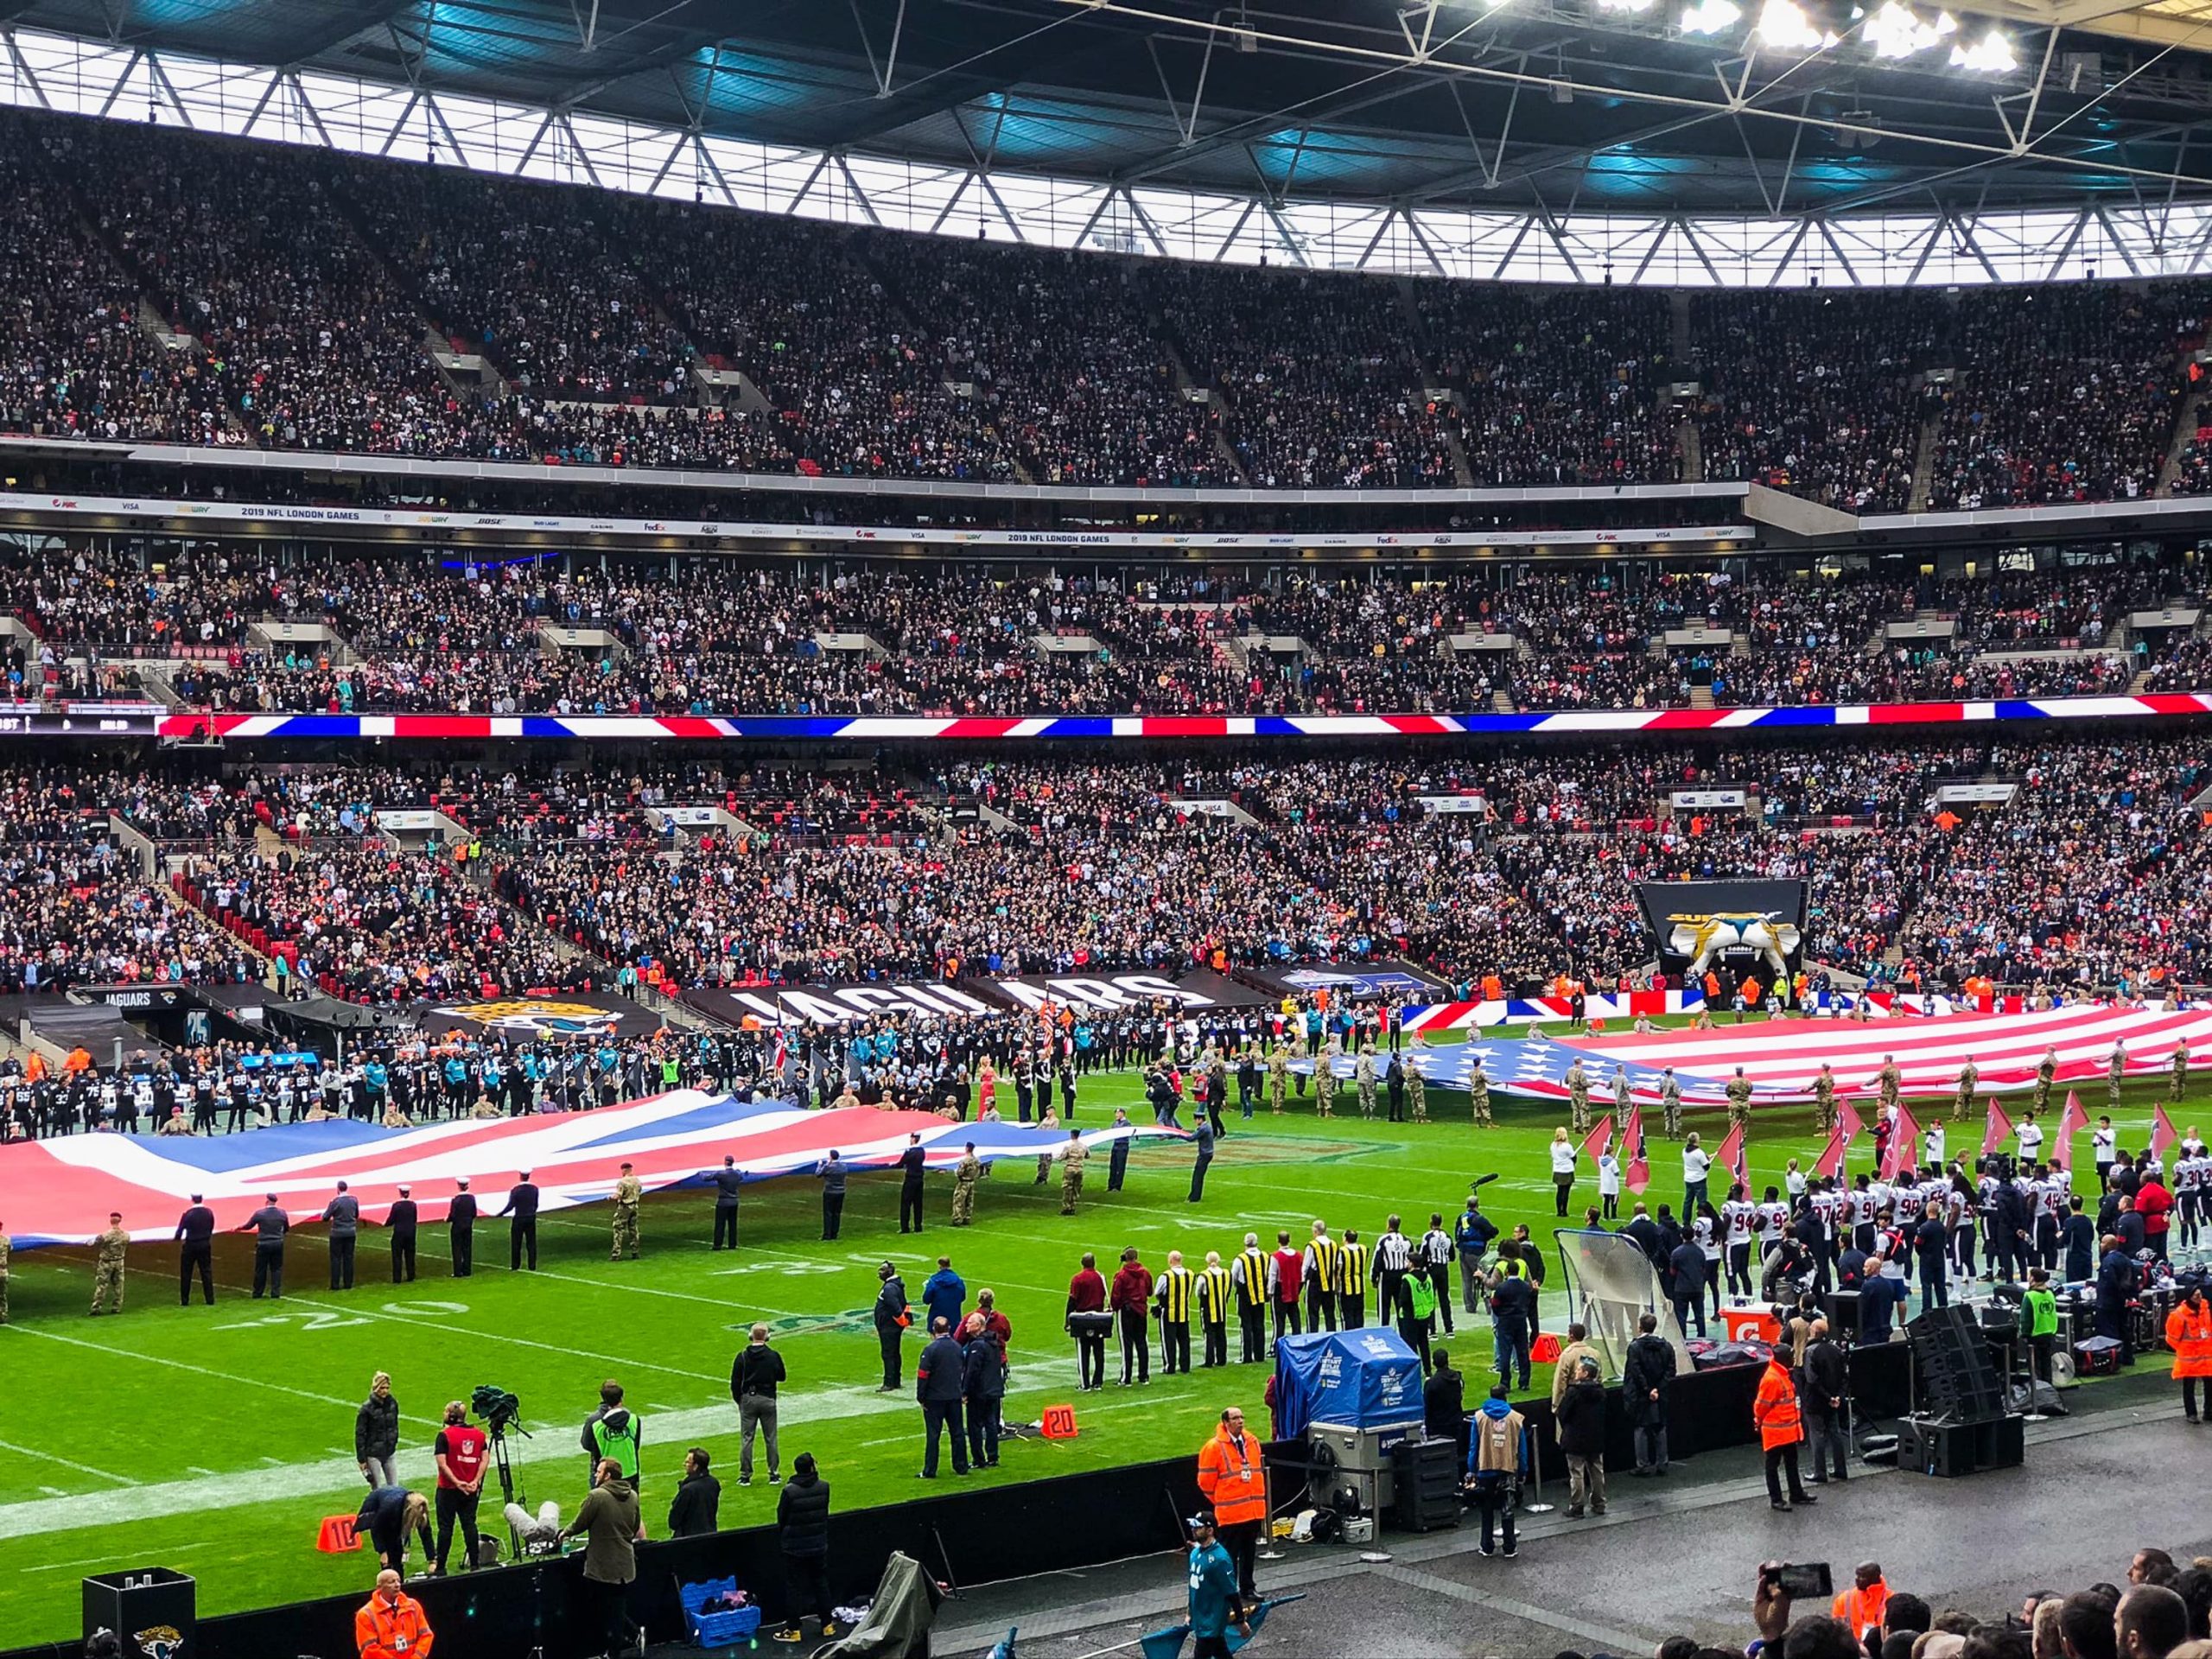 NFL International Series games 2022 revealed - Early odds and lines